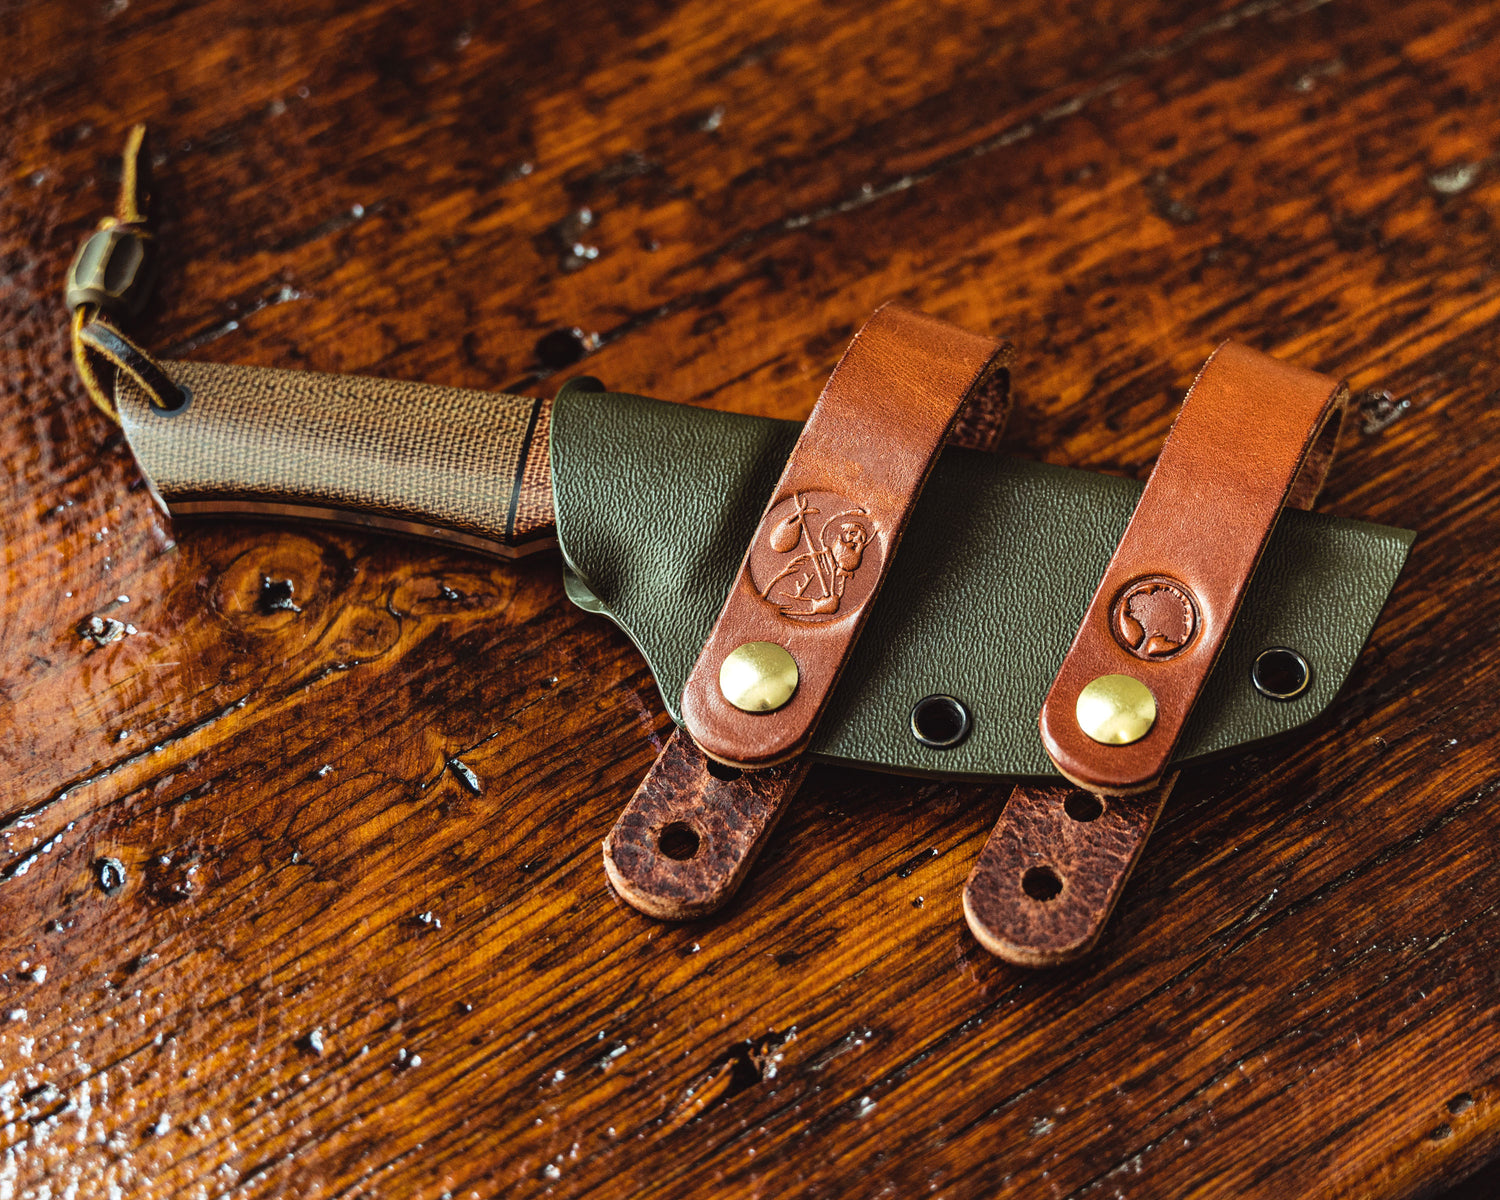 Carry Commission / Redeemed Creations Scout Straps attached to knife sheath overhead view on wooden background